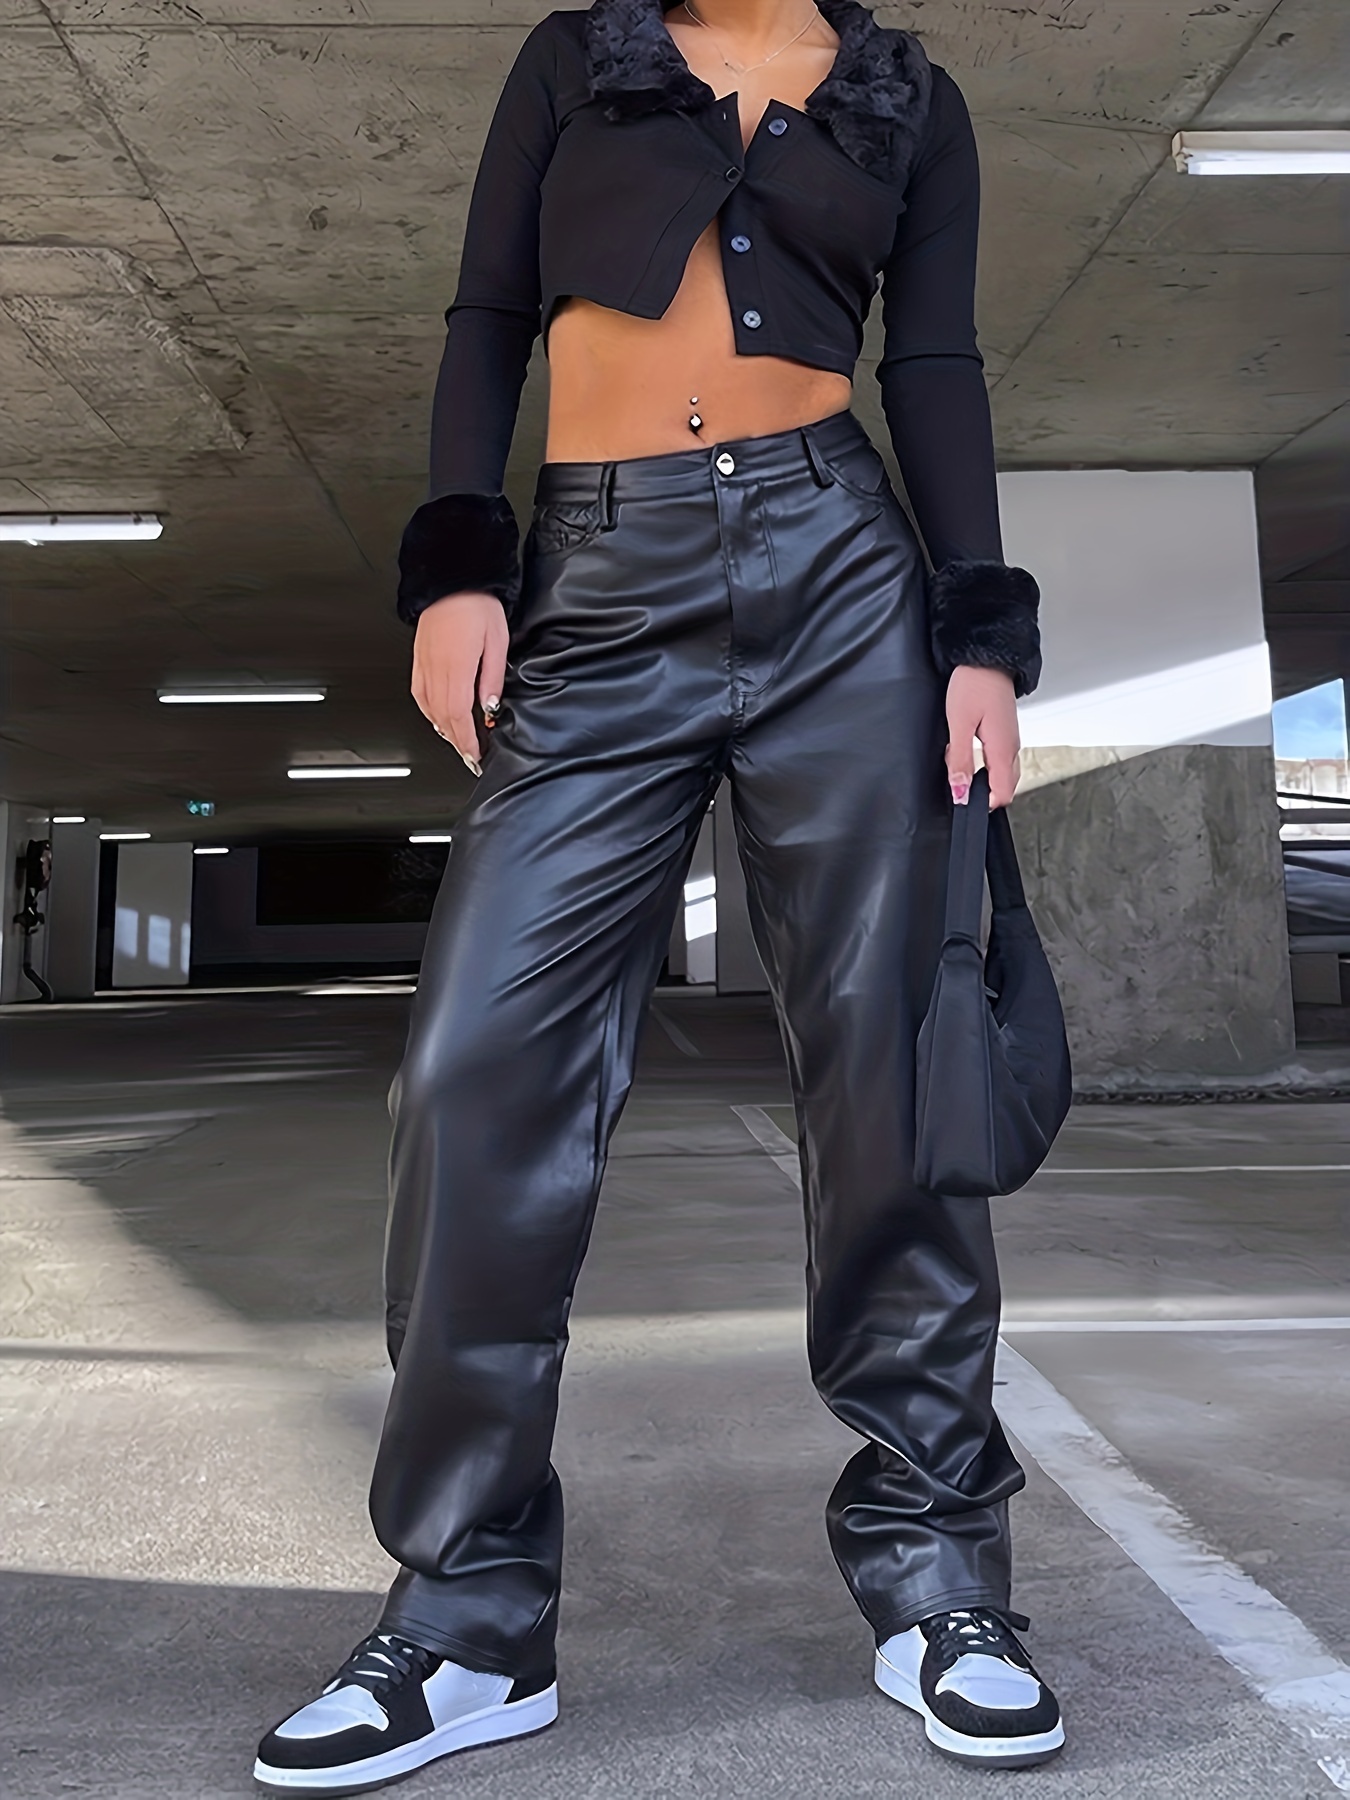 High Waist PU Leather Petite Faux Leather Trousers With Pockets For Women  Fashionable Streetwear For Slimming And Comfortable Wear From Jiejingg,  $18.29